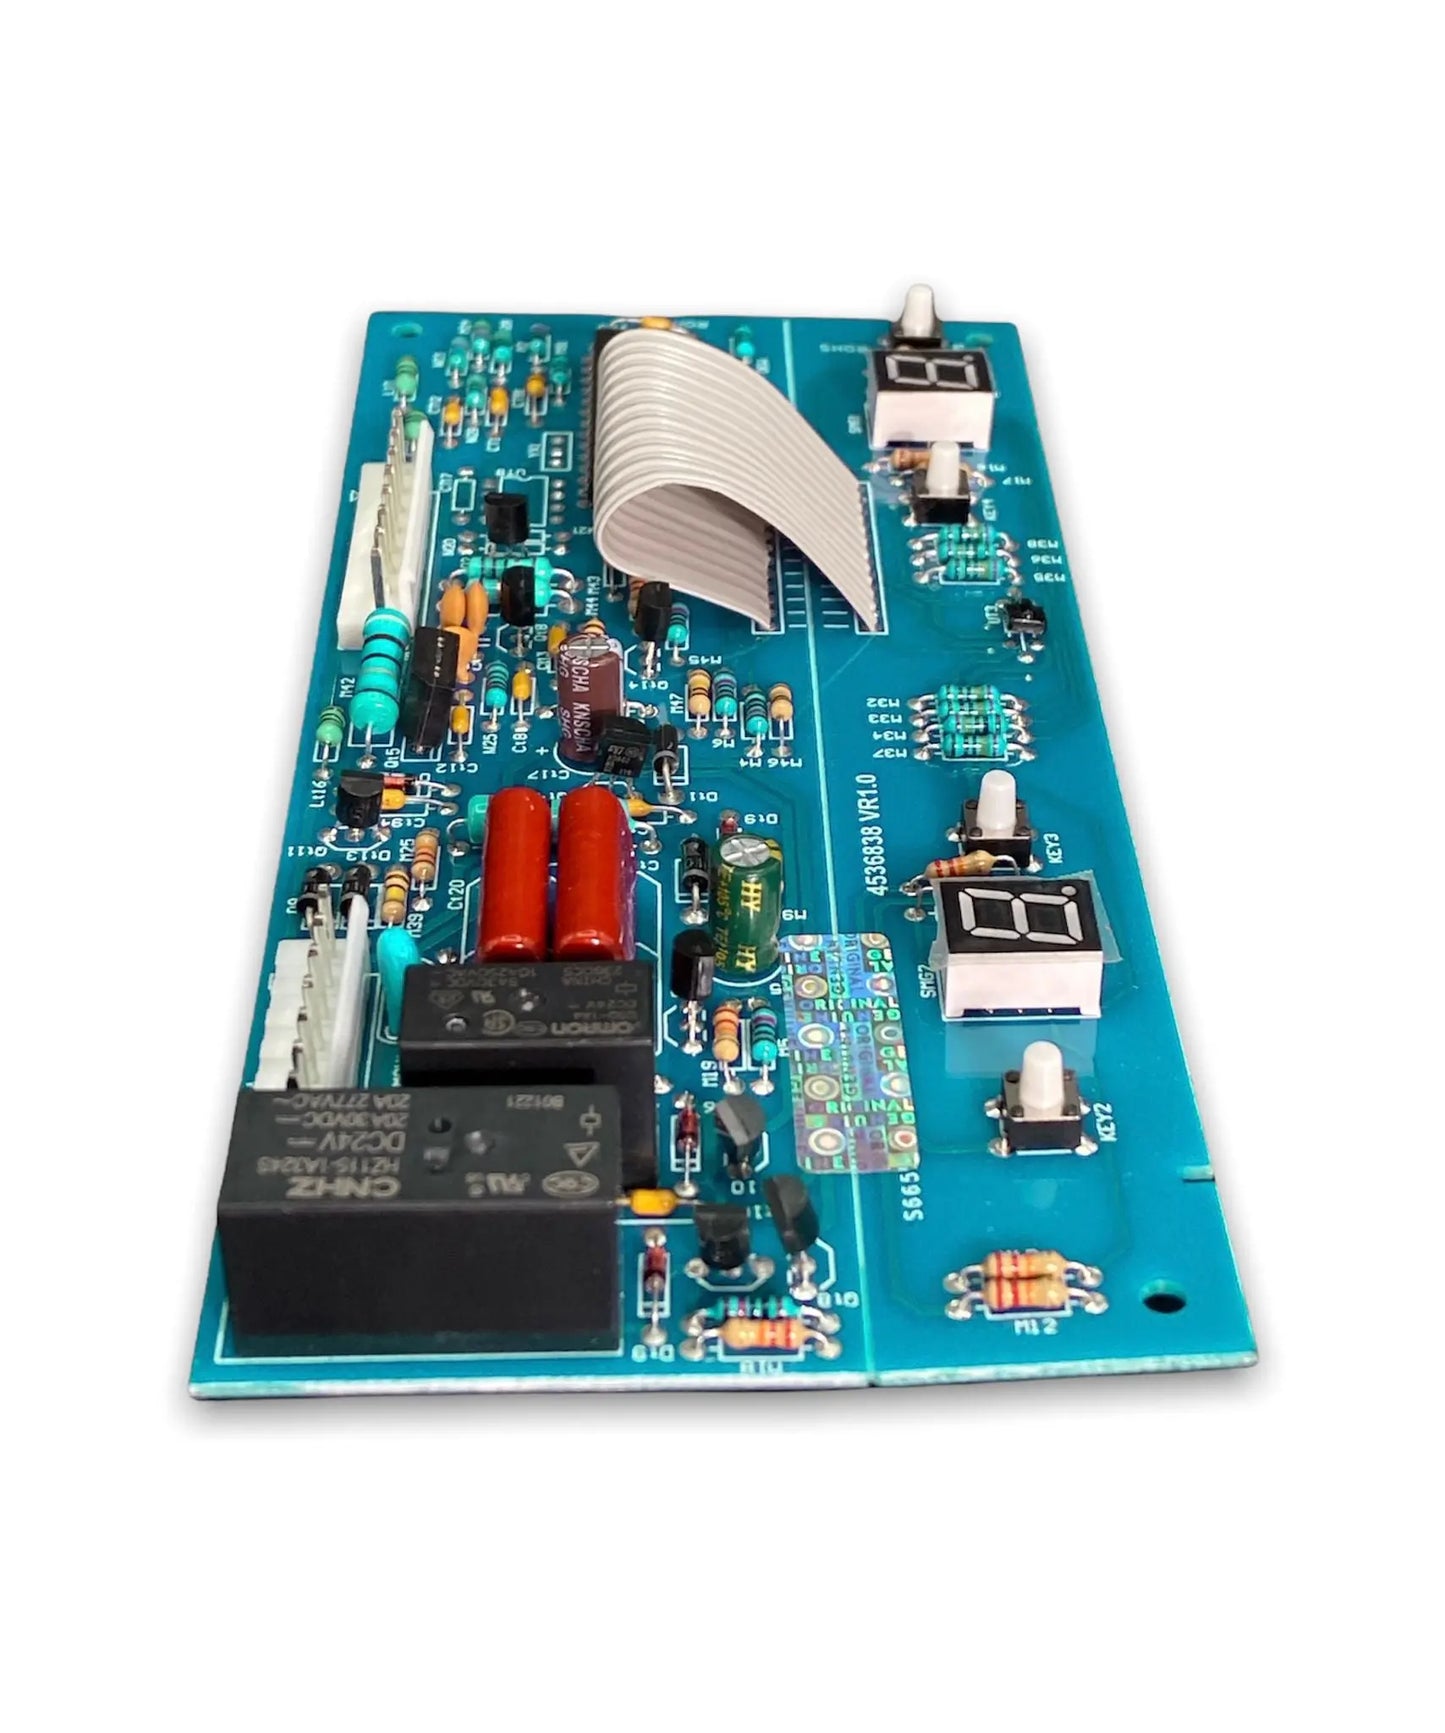 Whirlpool Refrigerator Electronic Control Board - WPW10637328,  REPLACES:  W10637328 4448972 AP6023547 PS11756892 EAP11756892 PD00052920 INVERTEC